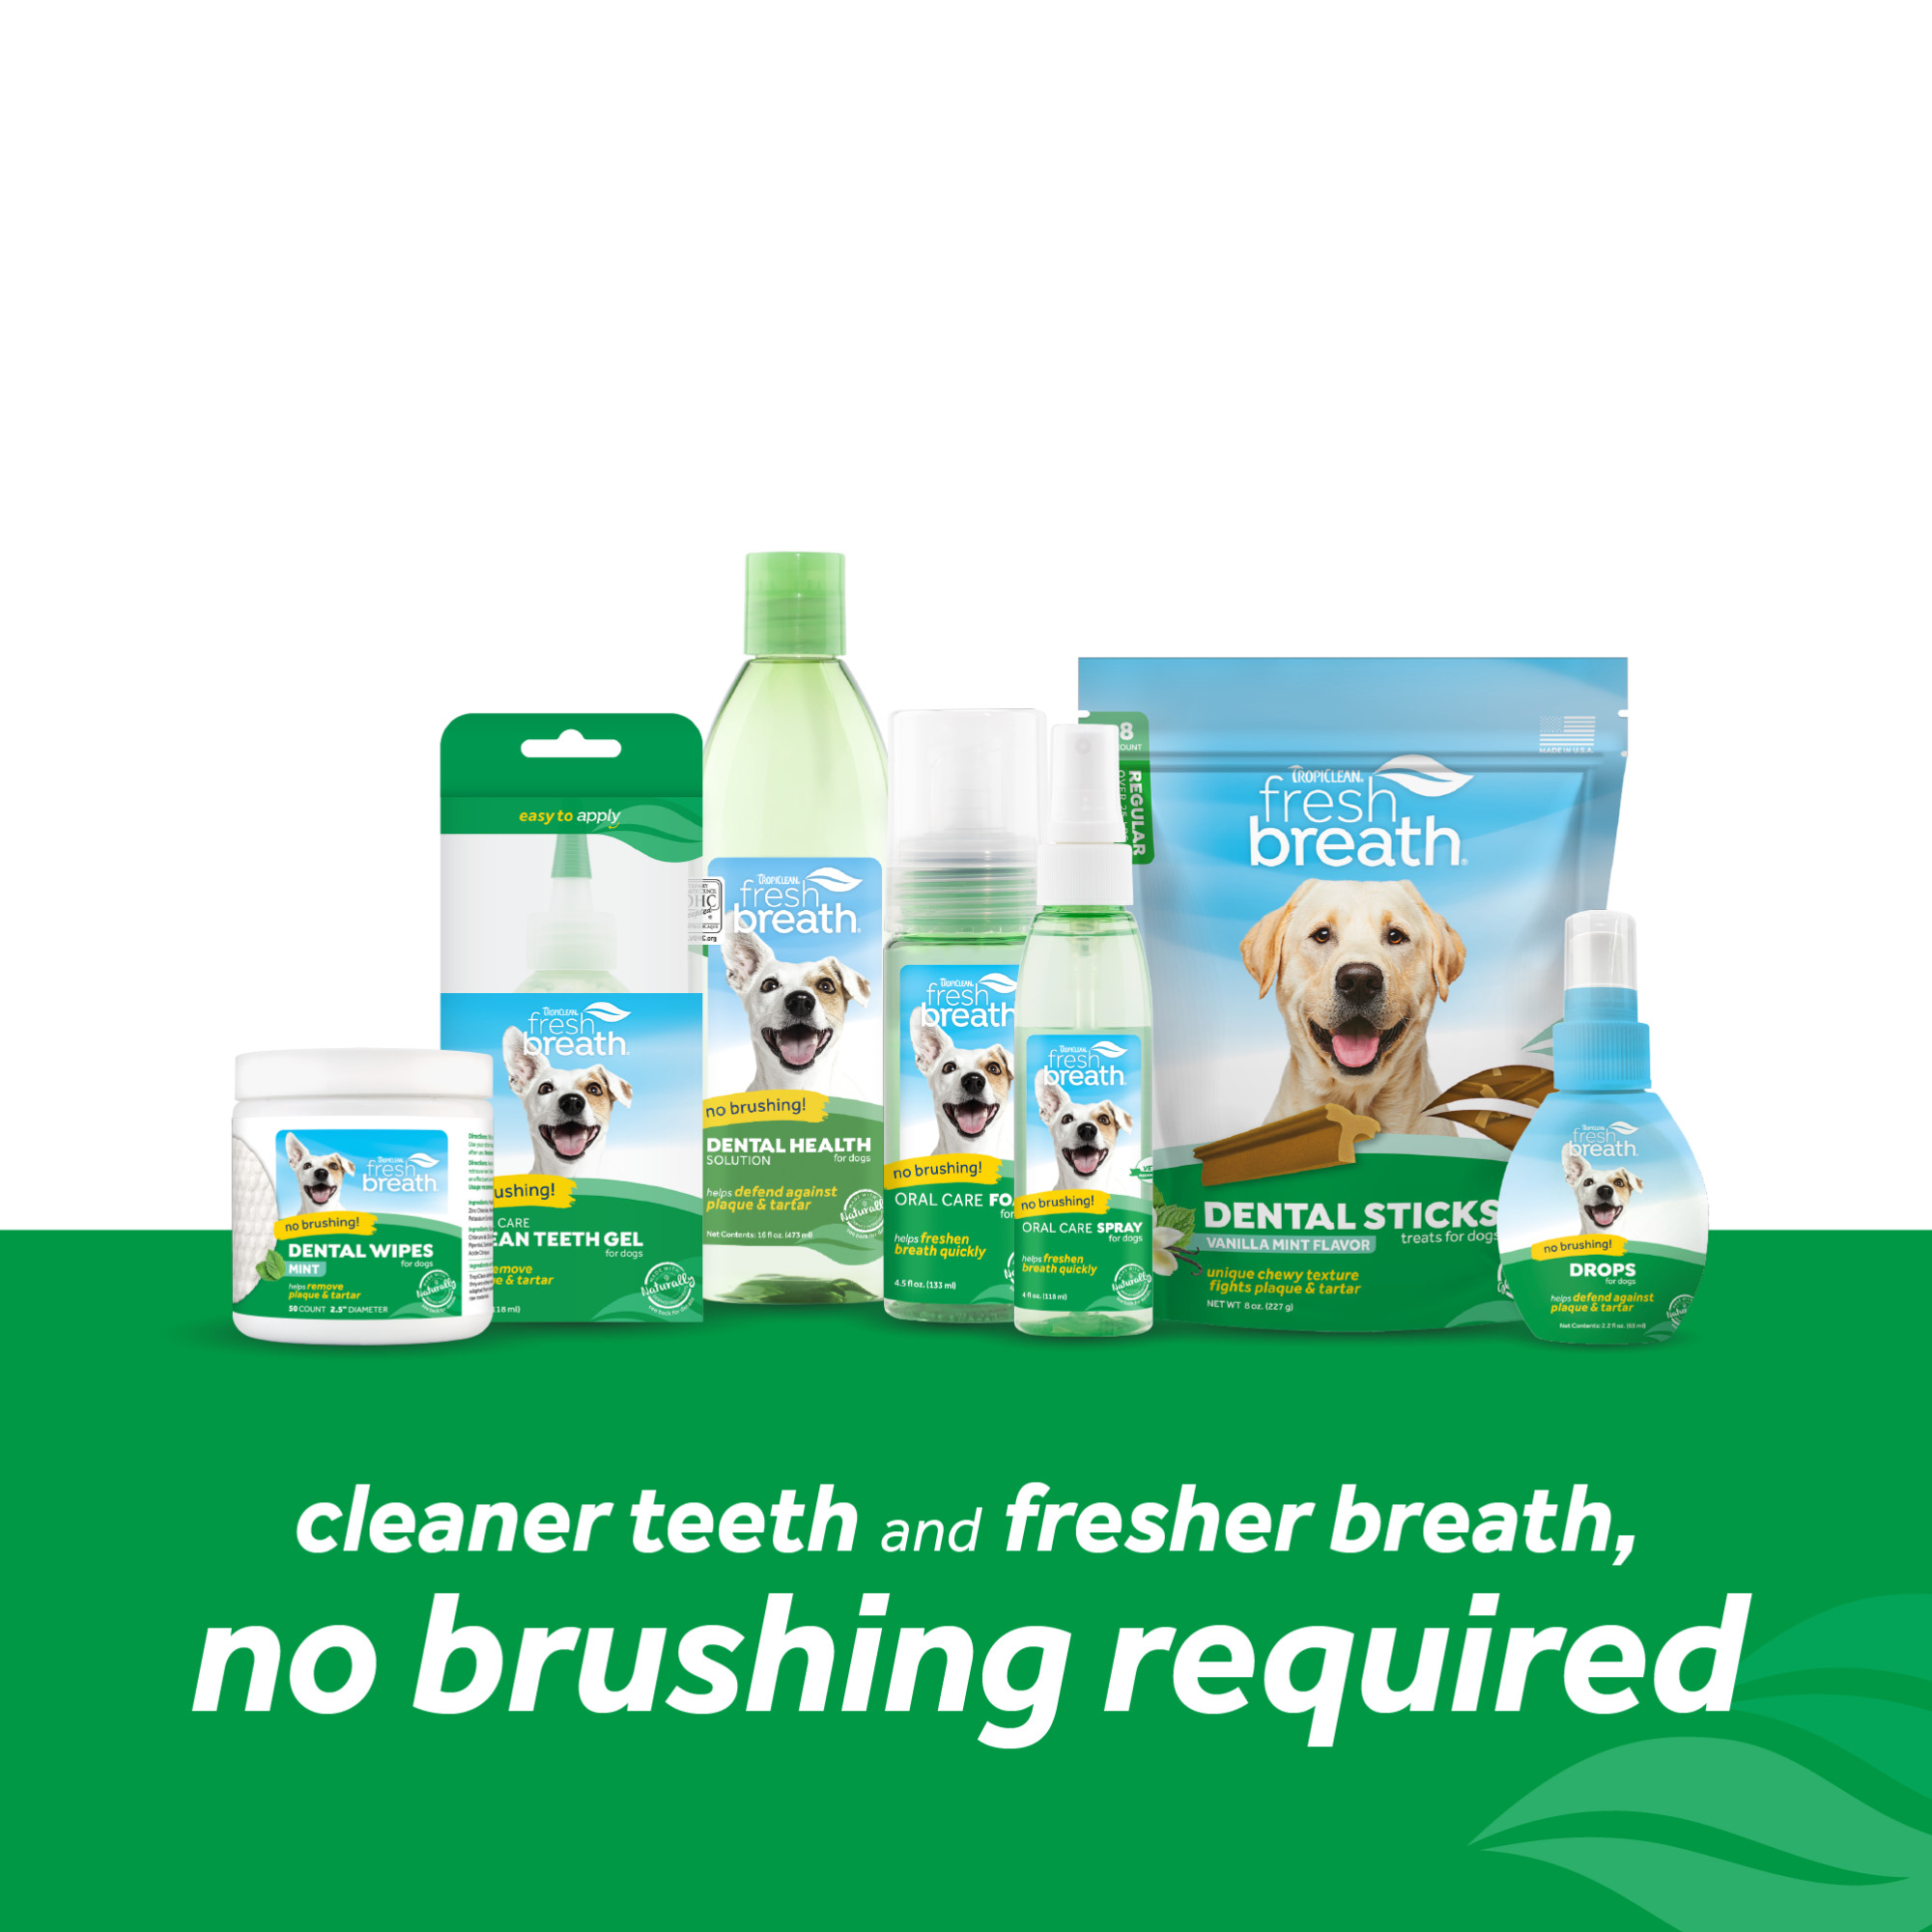 Oral Care Gel for Dogs